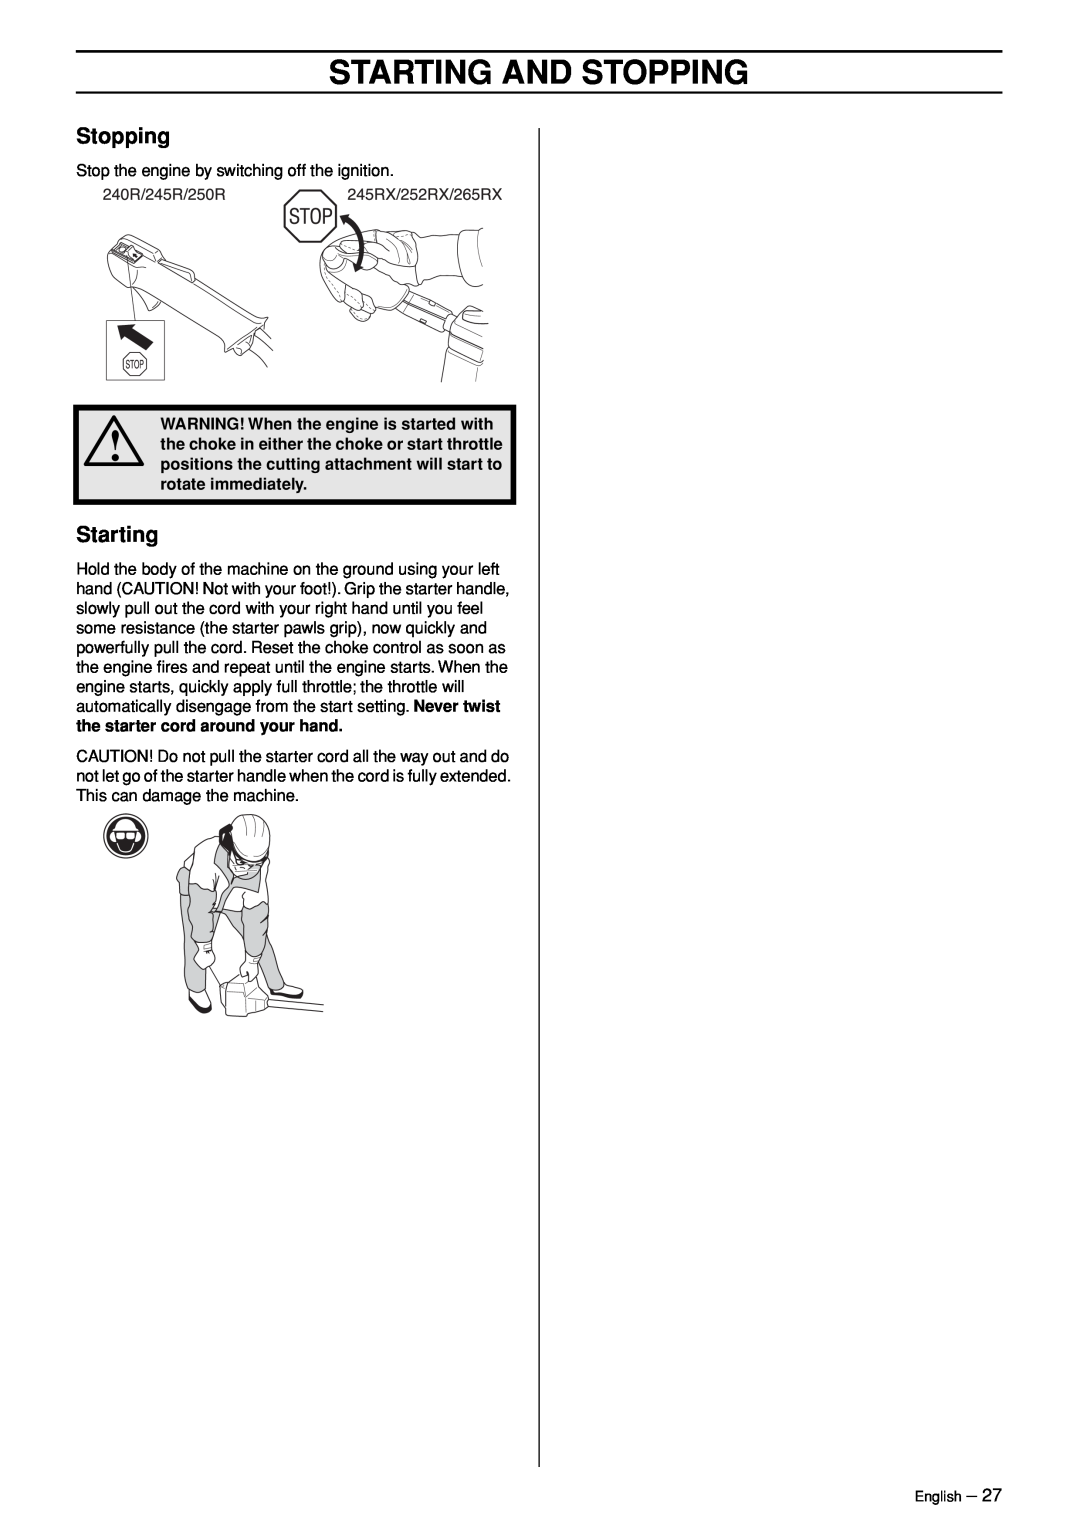 Husqvarna 245RX manual Starting And Stopping, Stop the engine by switching off the ignition 